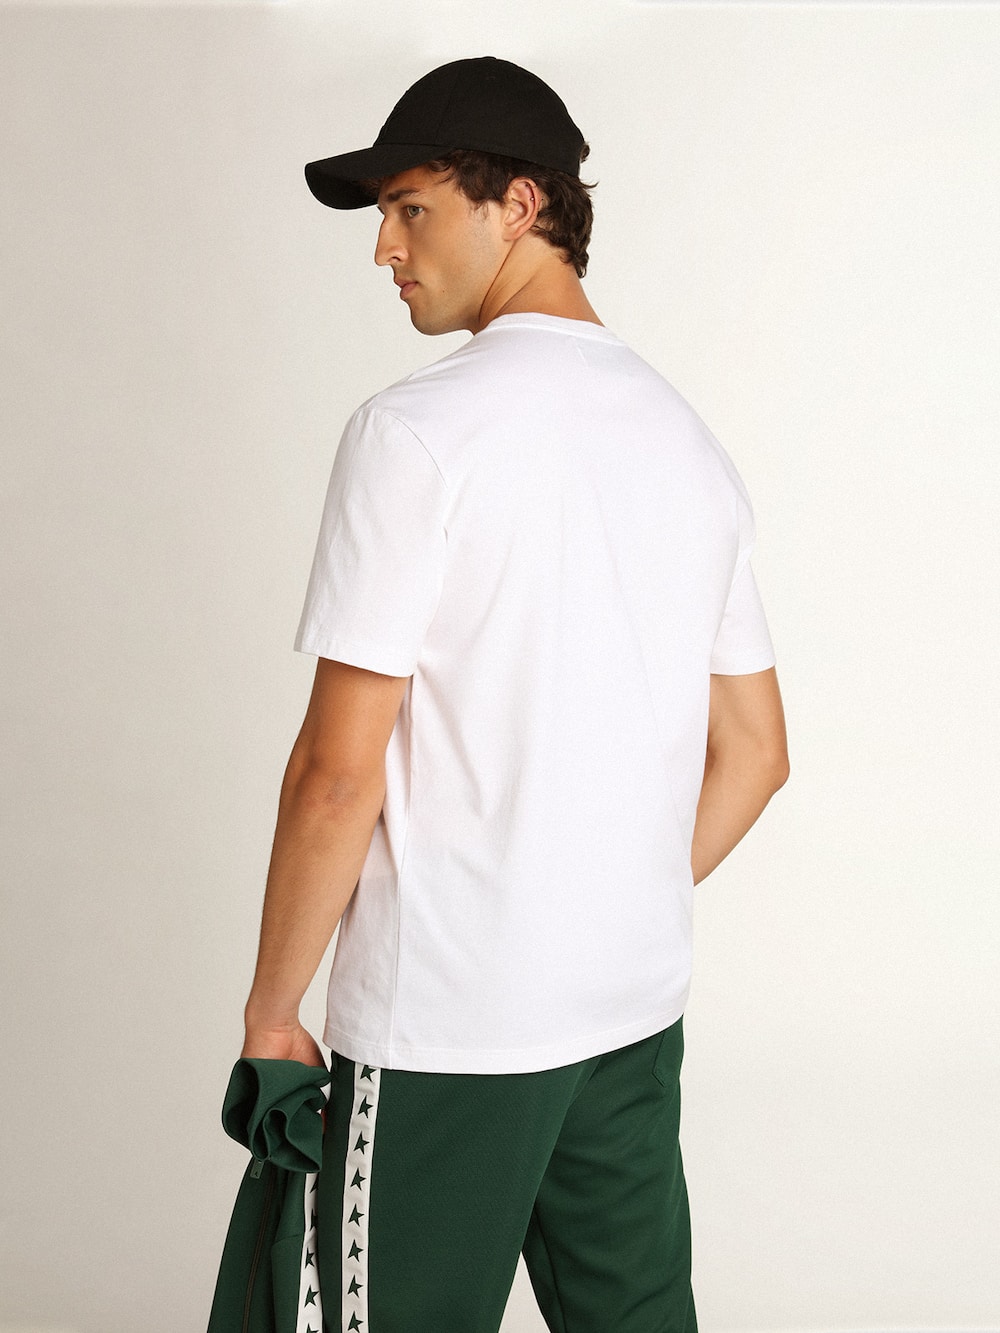 Golden Goose - White Star Collection T-shirt with contrasting green star on the front in 